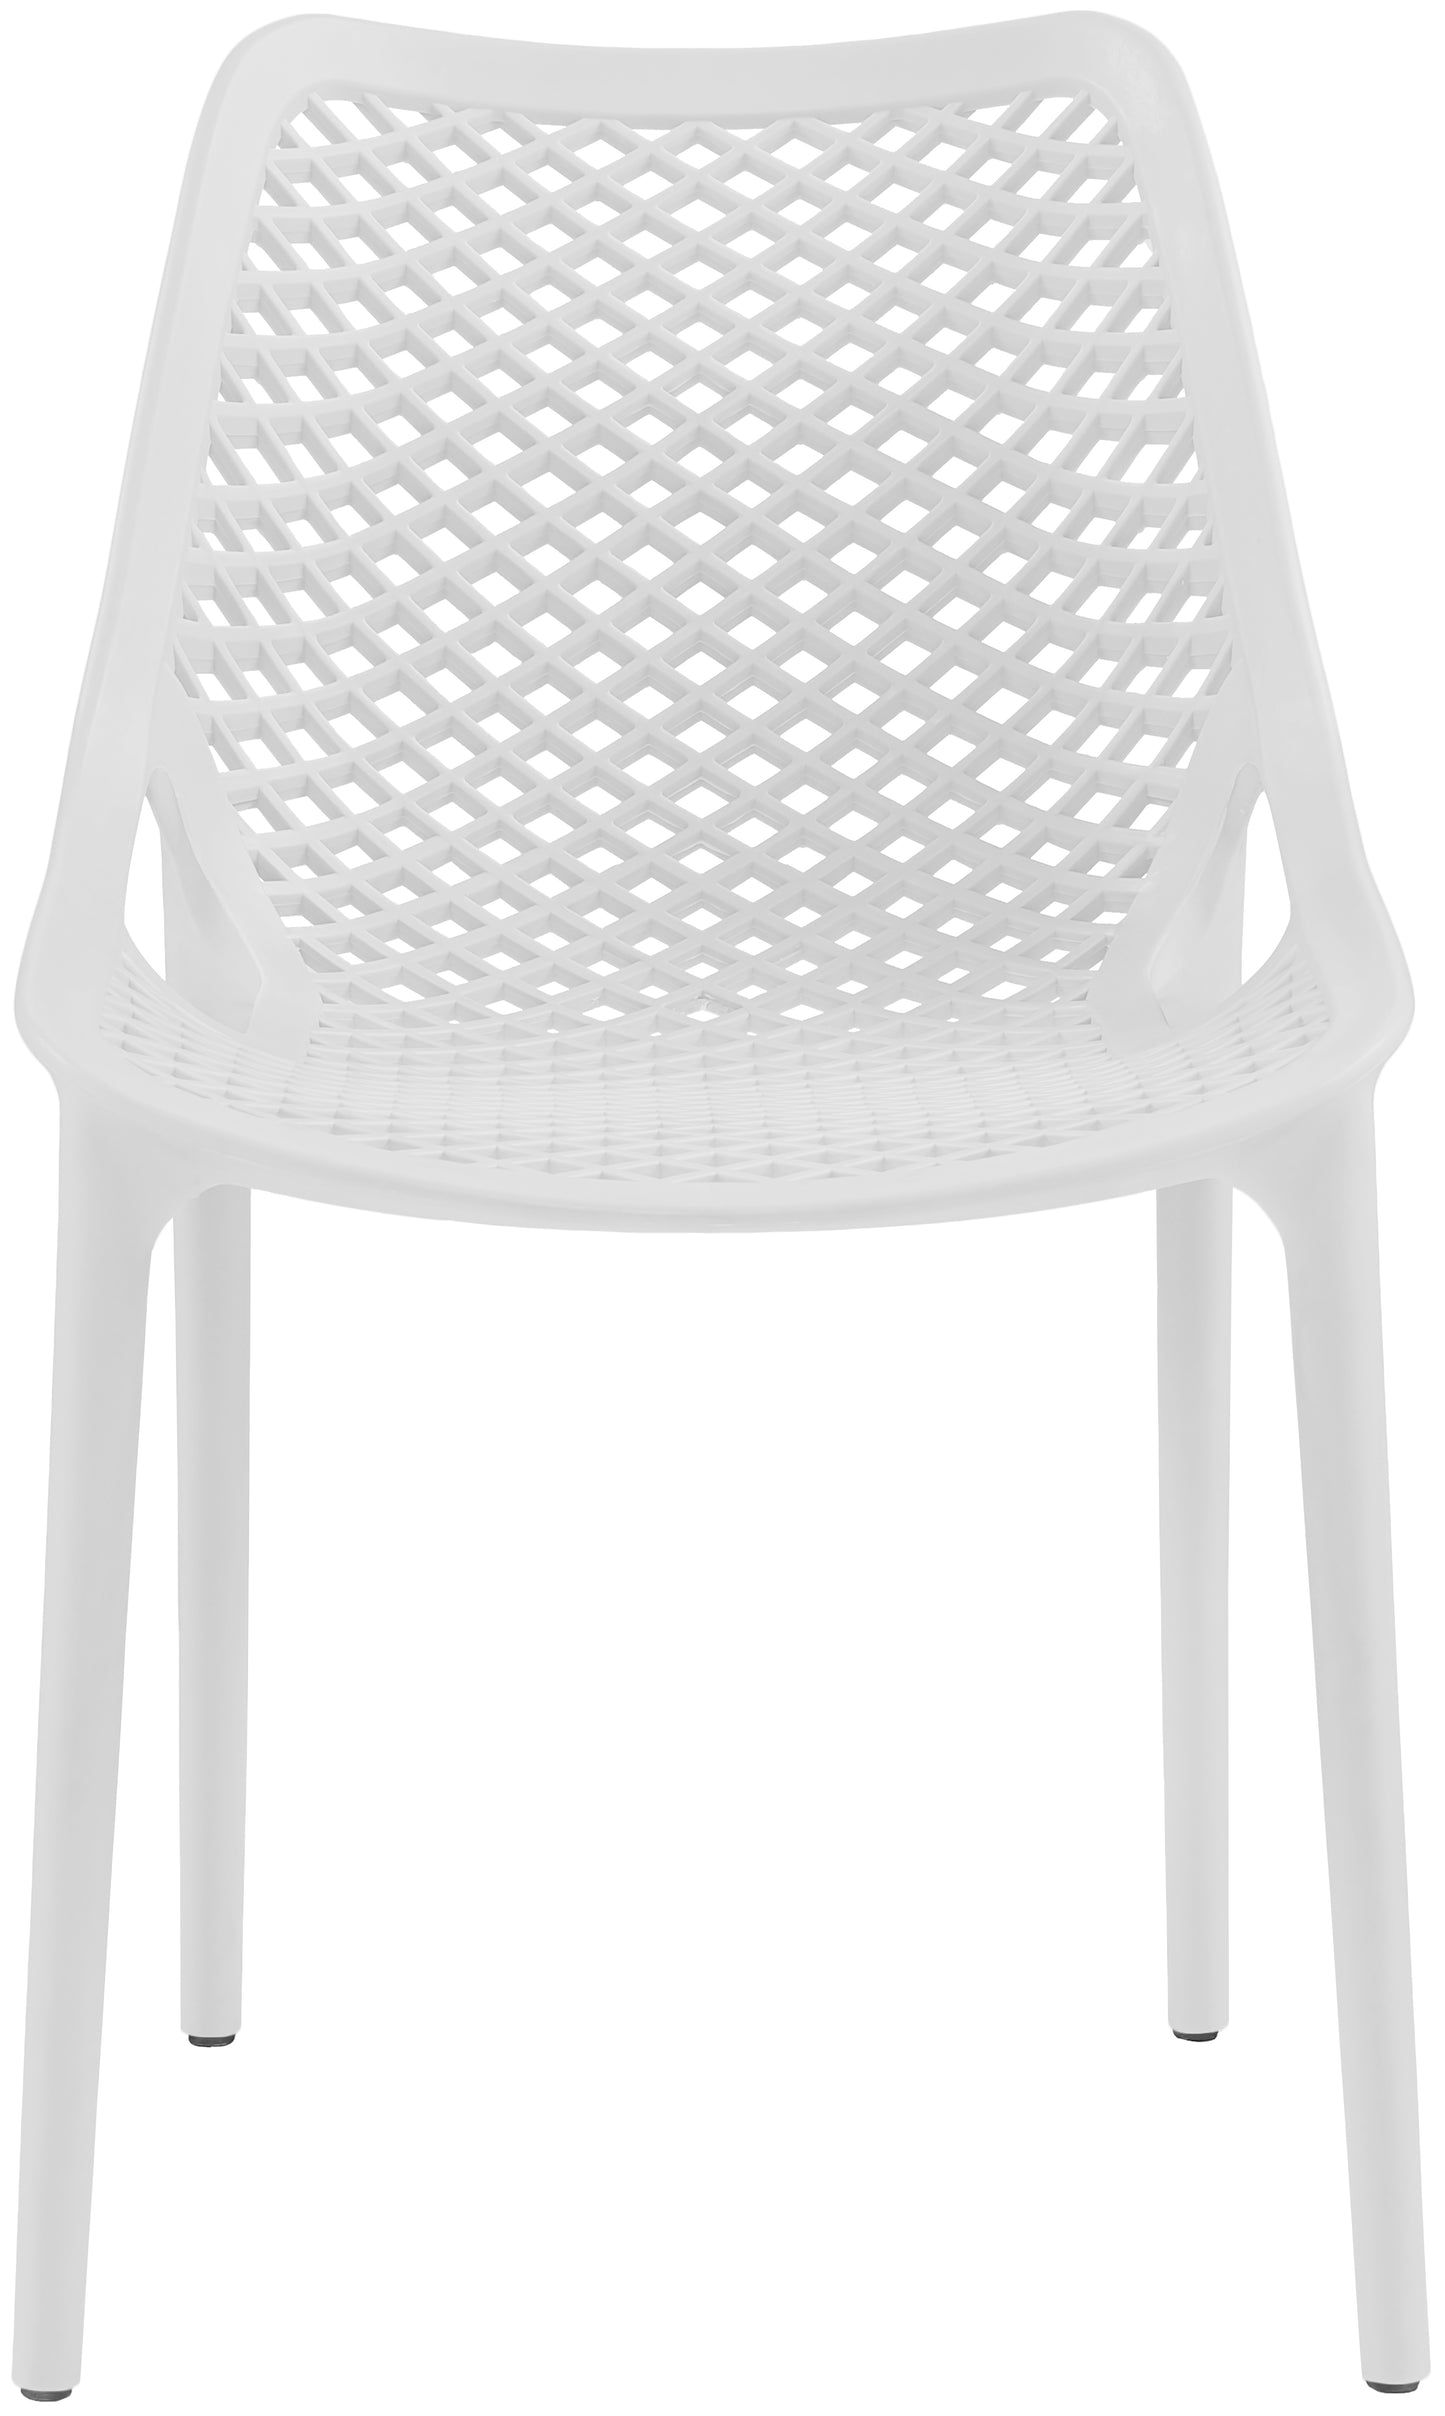 outdoor patio dining chair